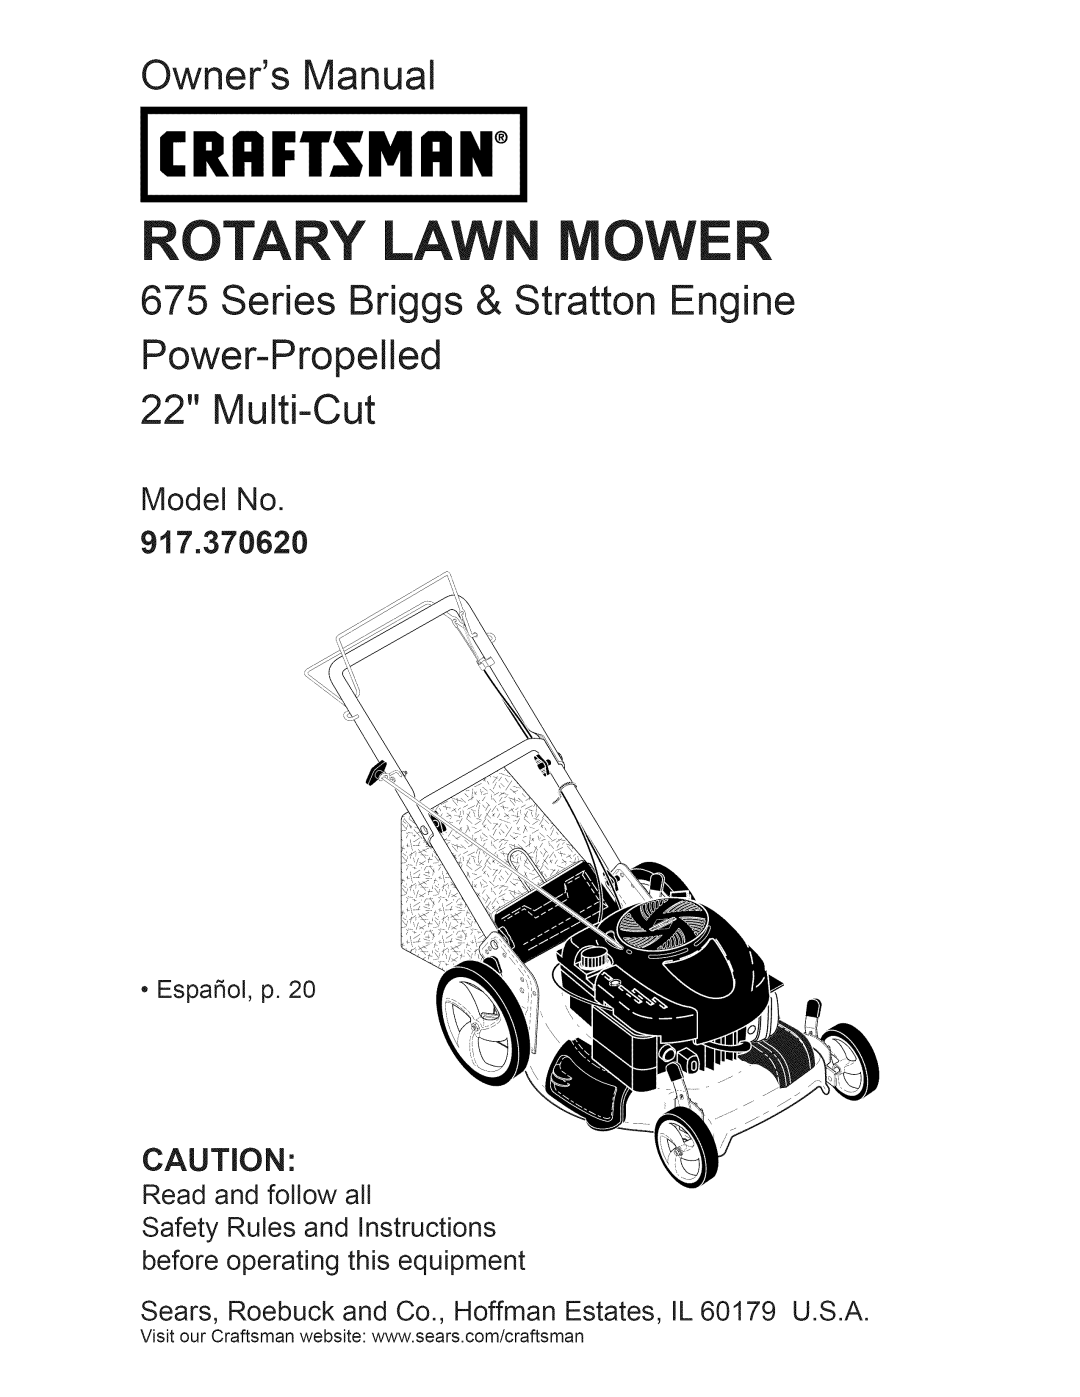 Craftsman 37062 owner manual Owners Manual, Series Briggs & Stratton Engine, Power-Propelled 22 Multi-Cut, Model No 